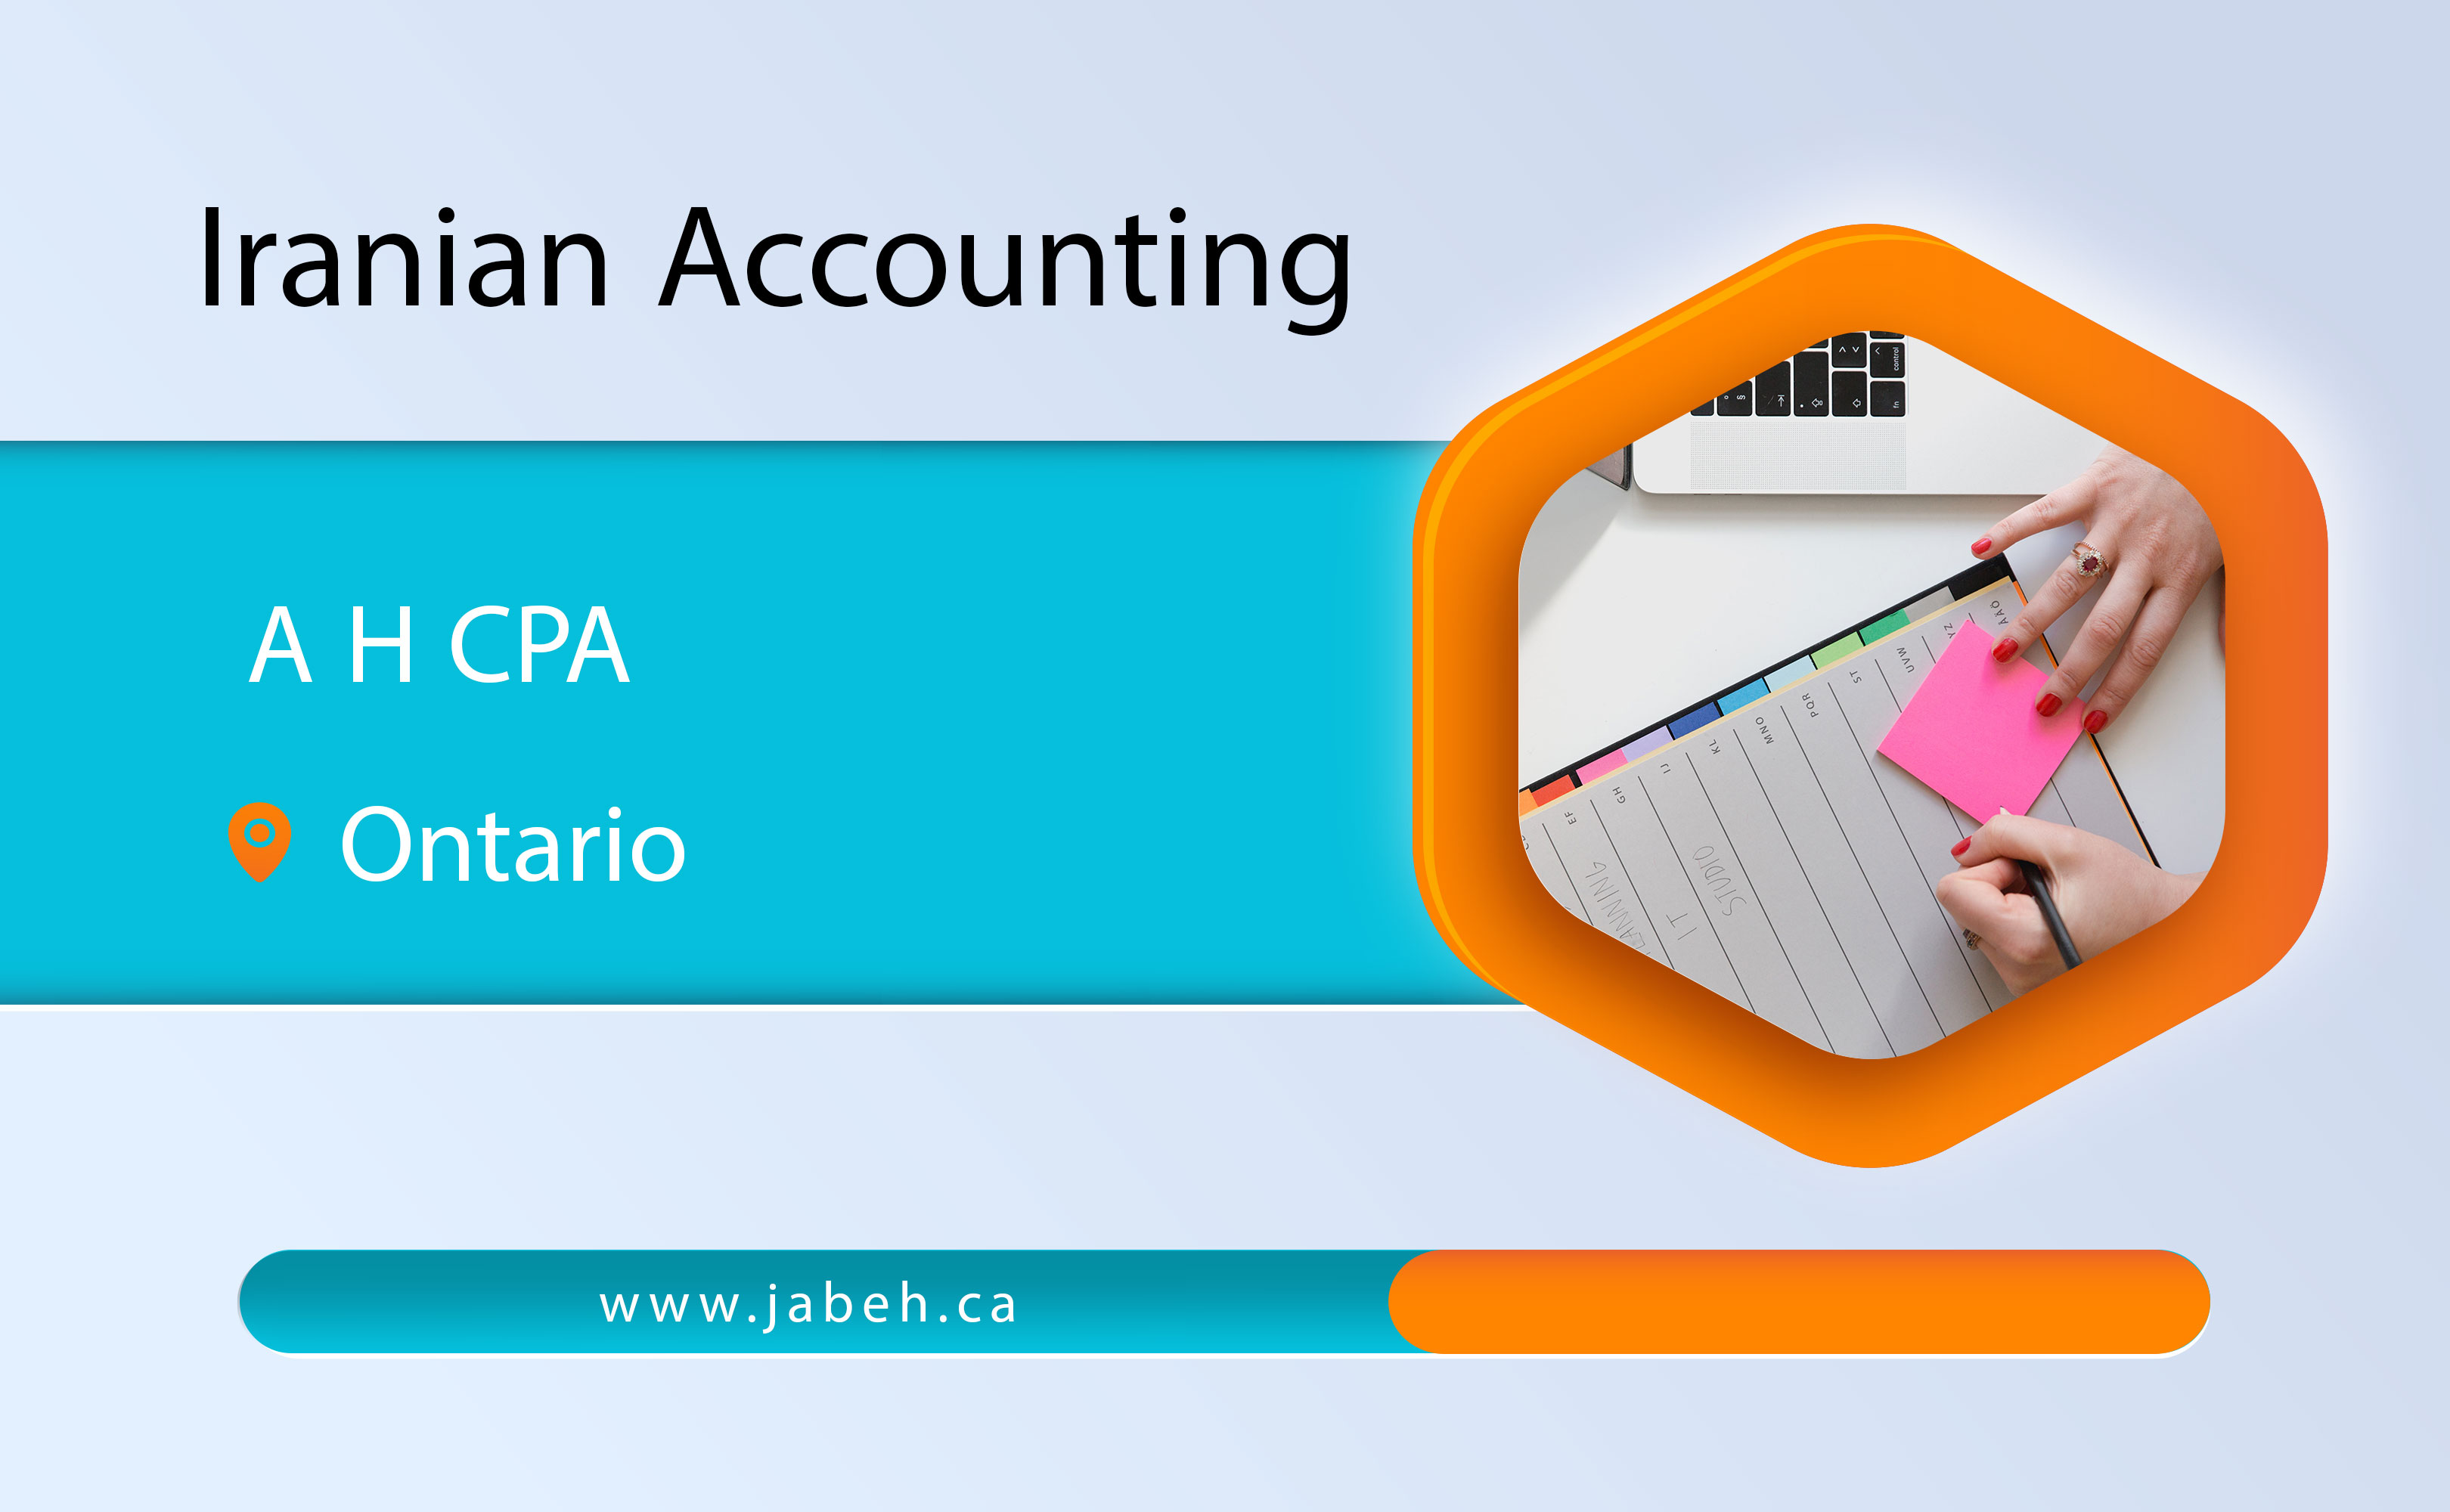 Iranian accounting company A H CPA in Ontario